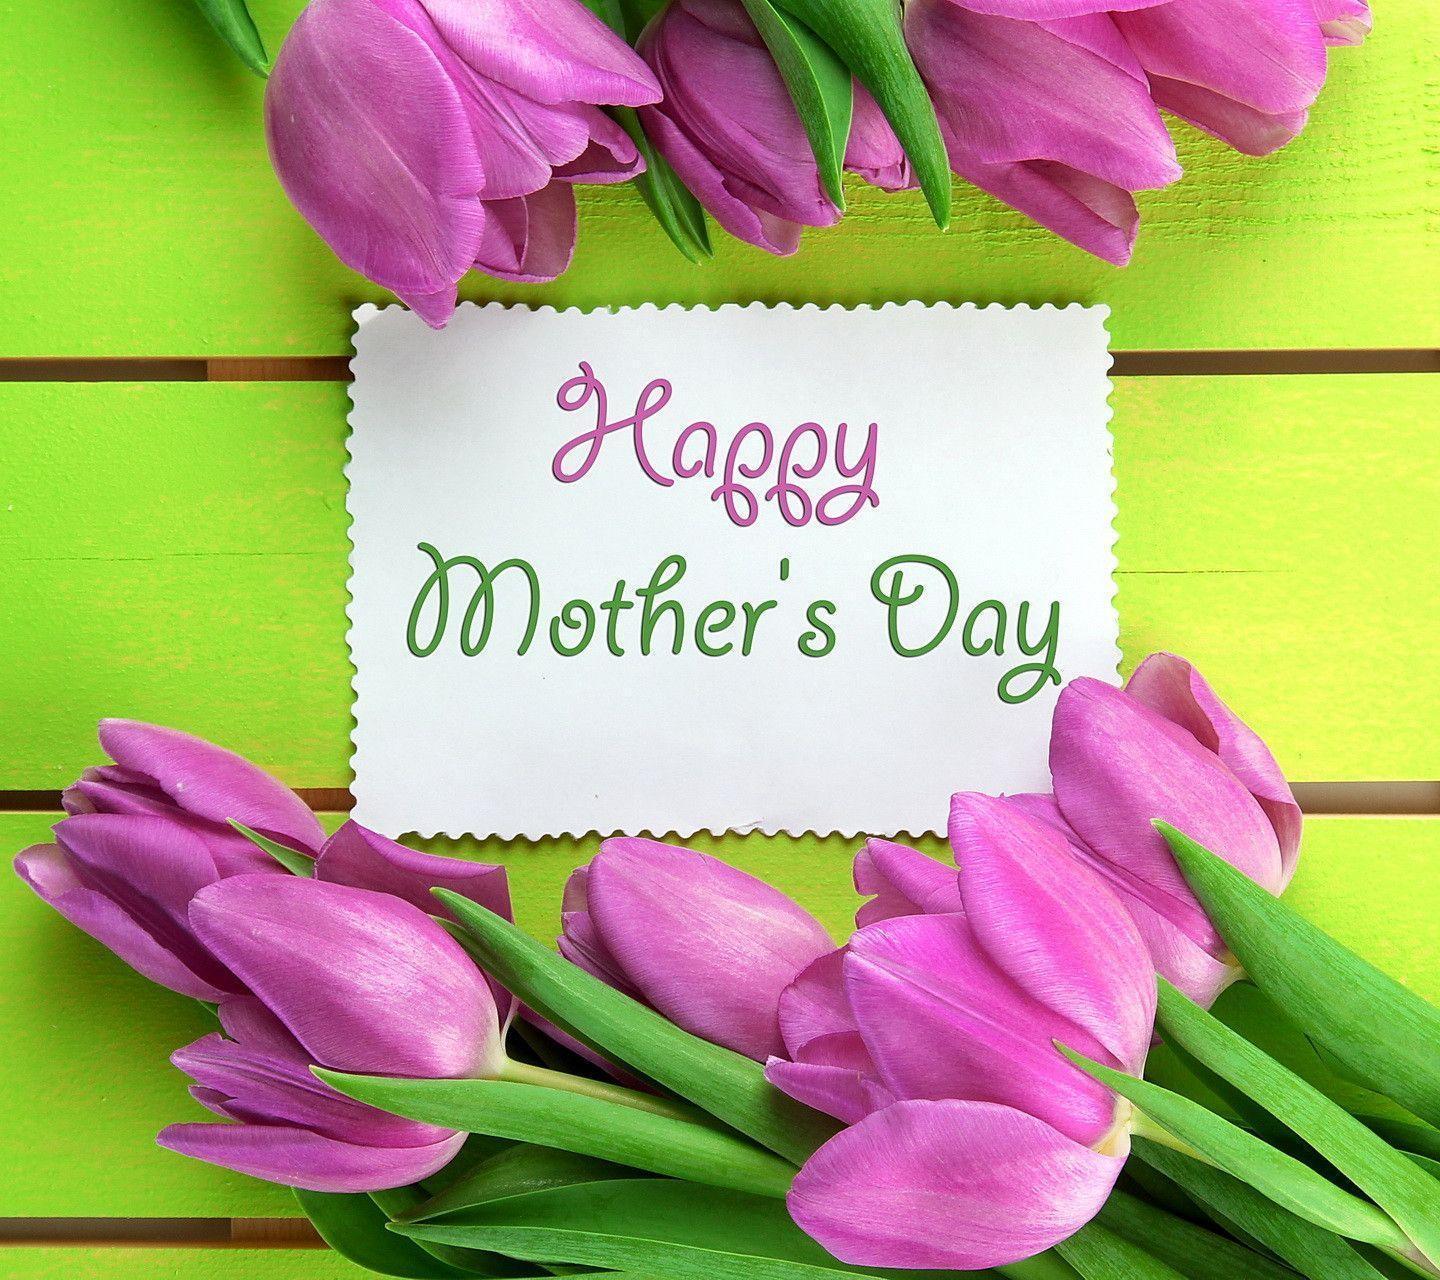 Free Mothers Day Wallpapers - Mothers Day In London - HD Wallpaper 